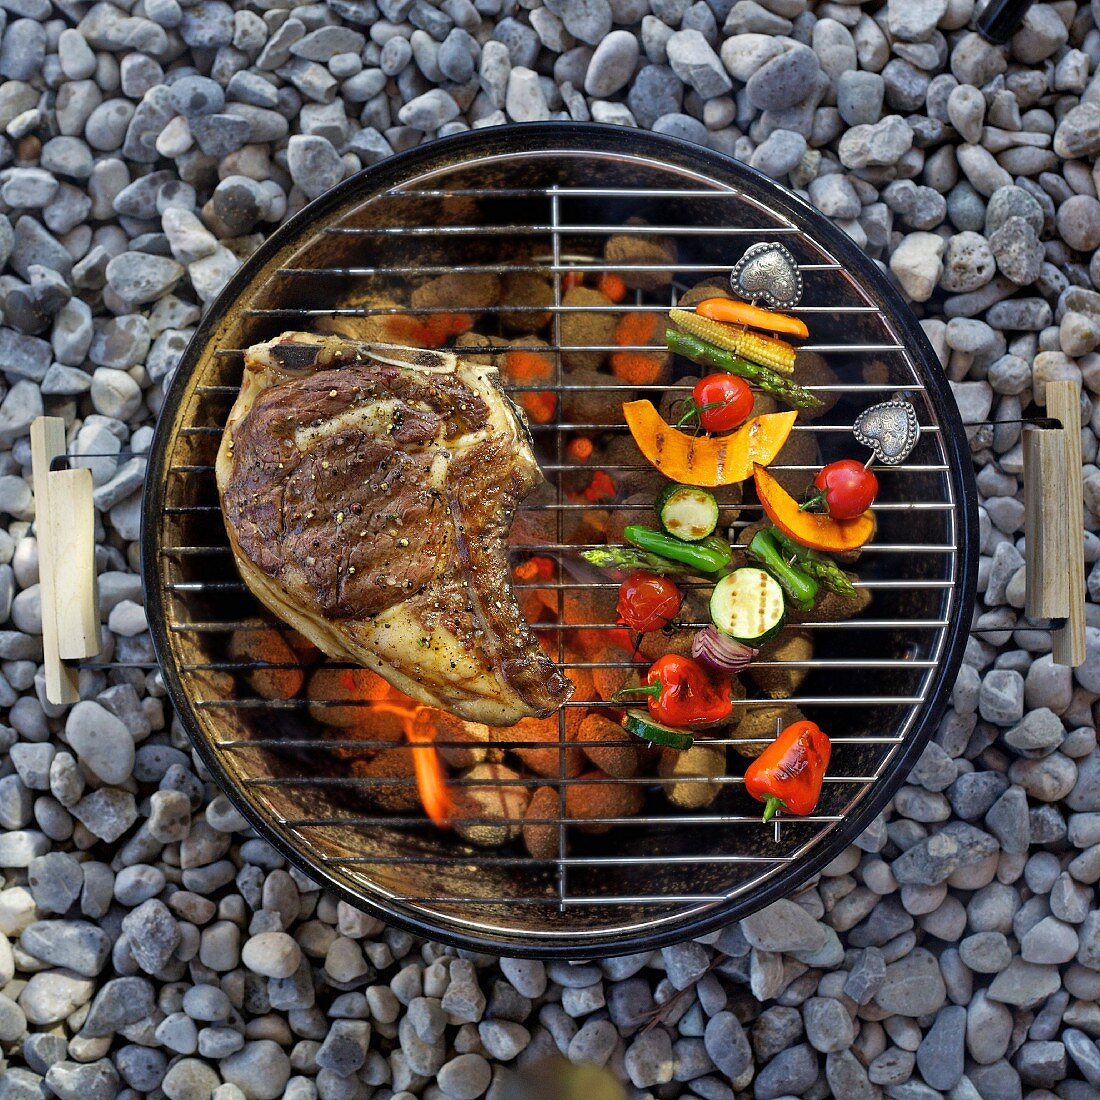 A T-bone steak and vegetables on the barbecue